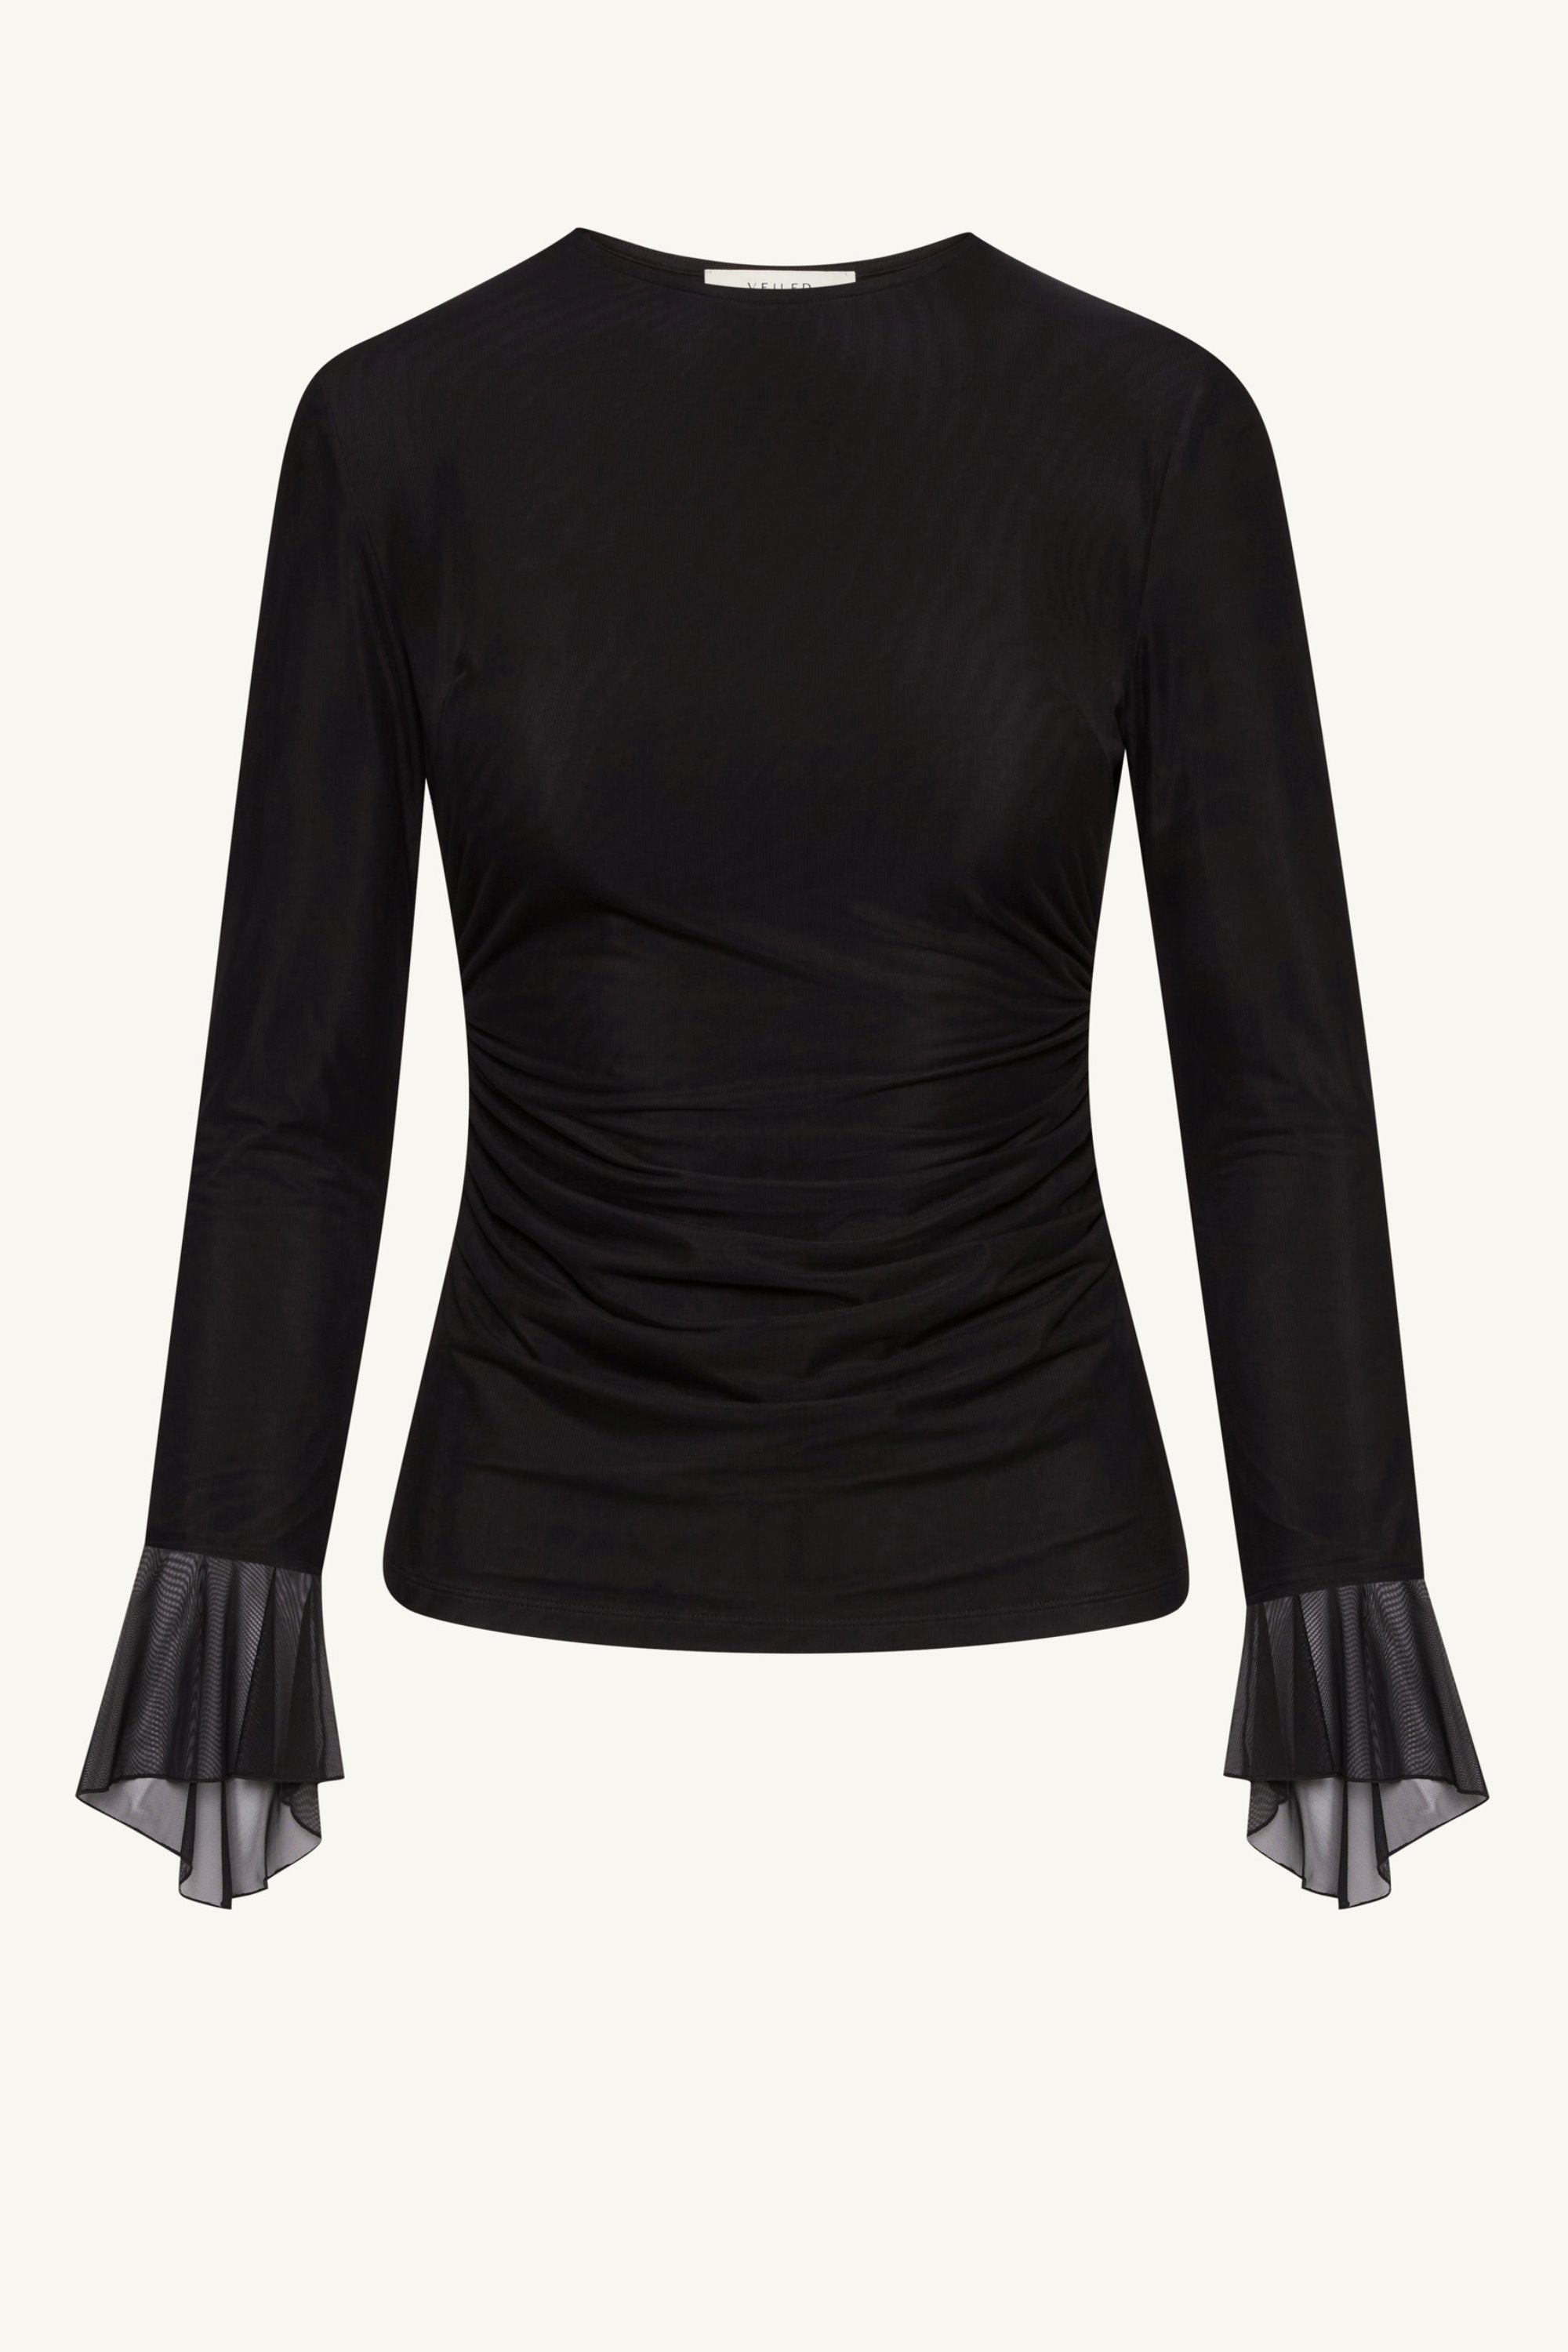 Lolita Rouched Mesh Top - Black Clothing epschoolboard 